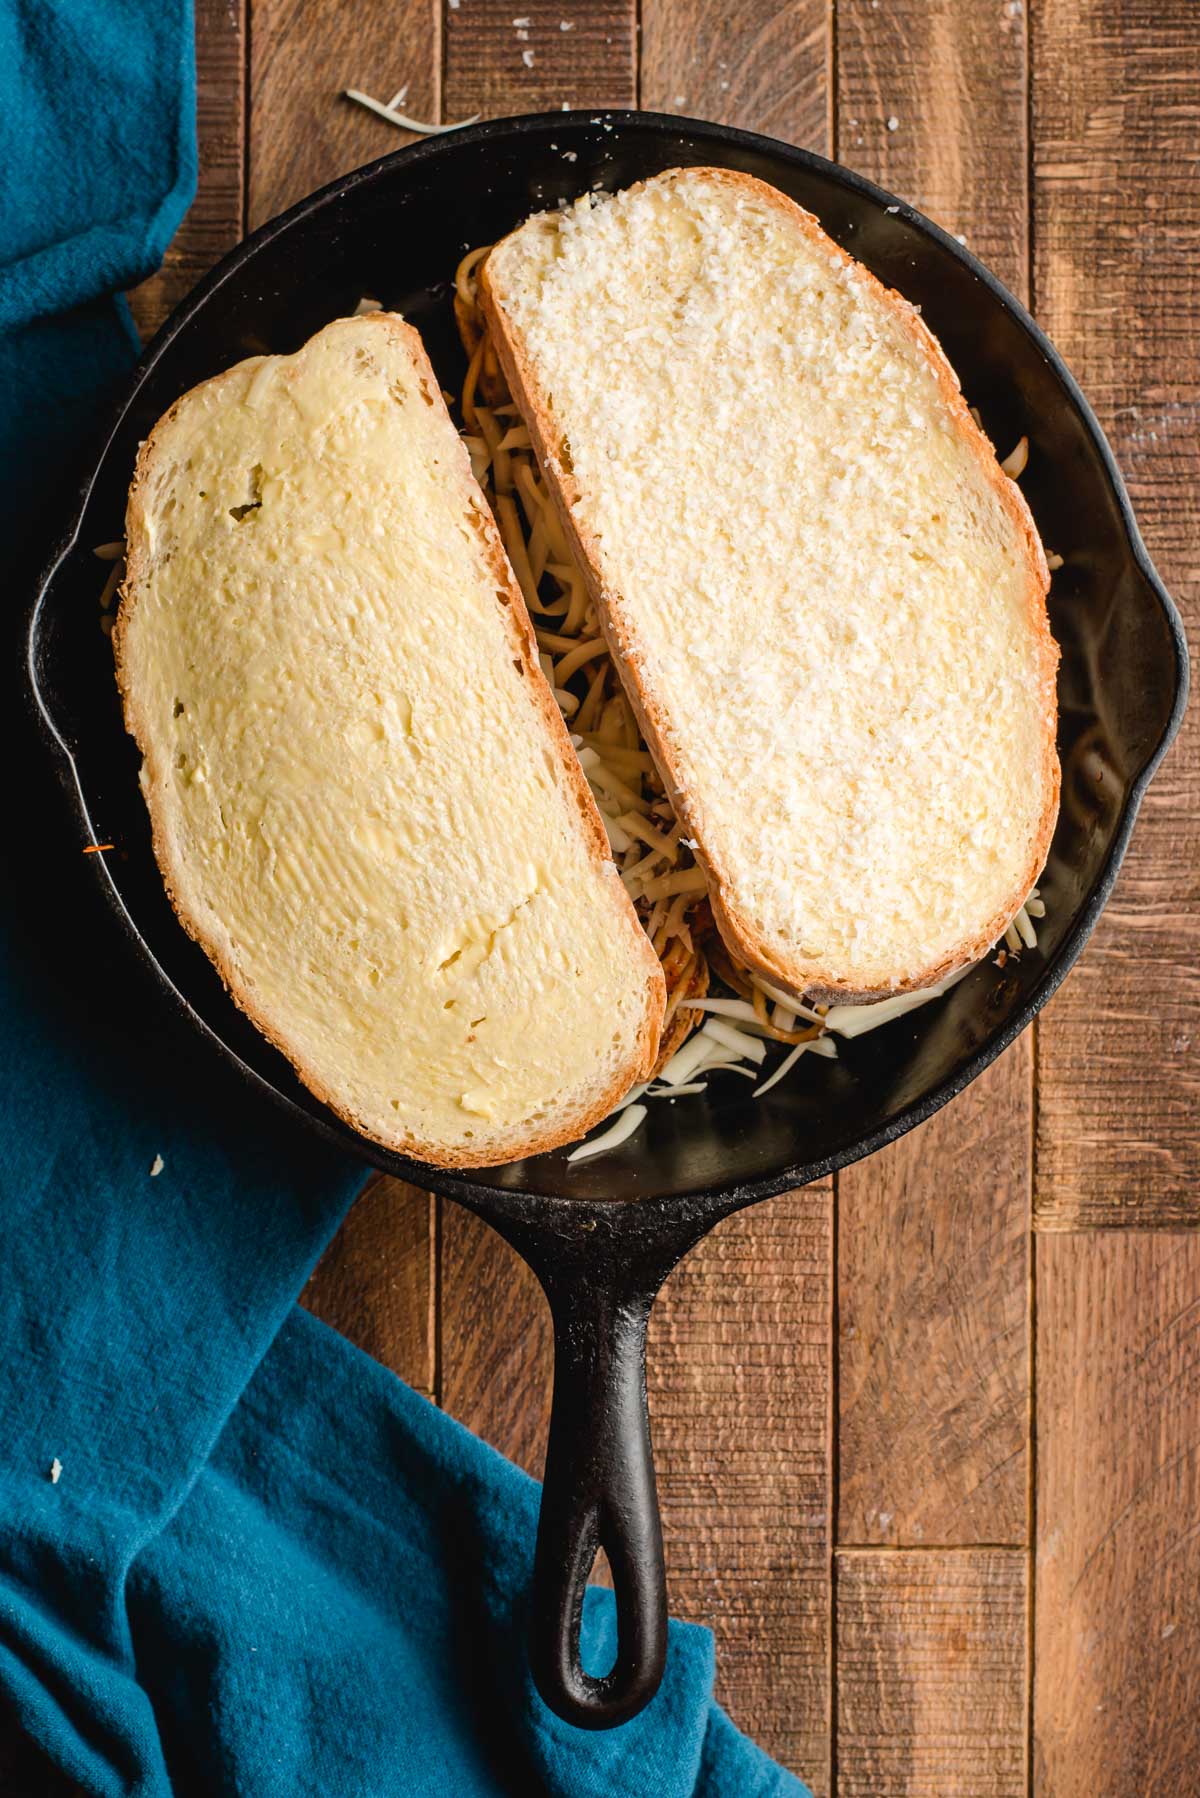 Two grilled cheeses with ungrilled side up in a cast iron skillet.